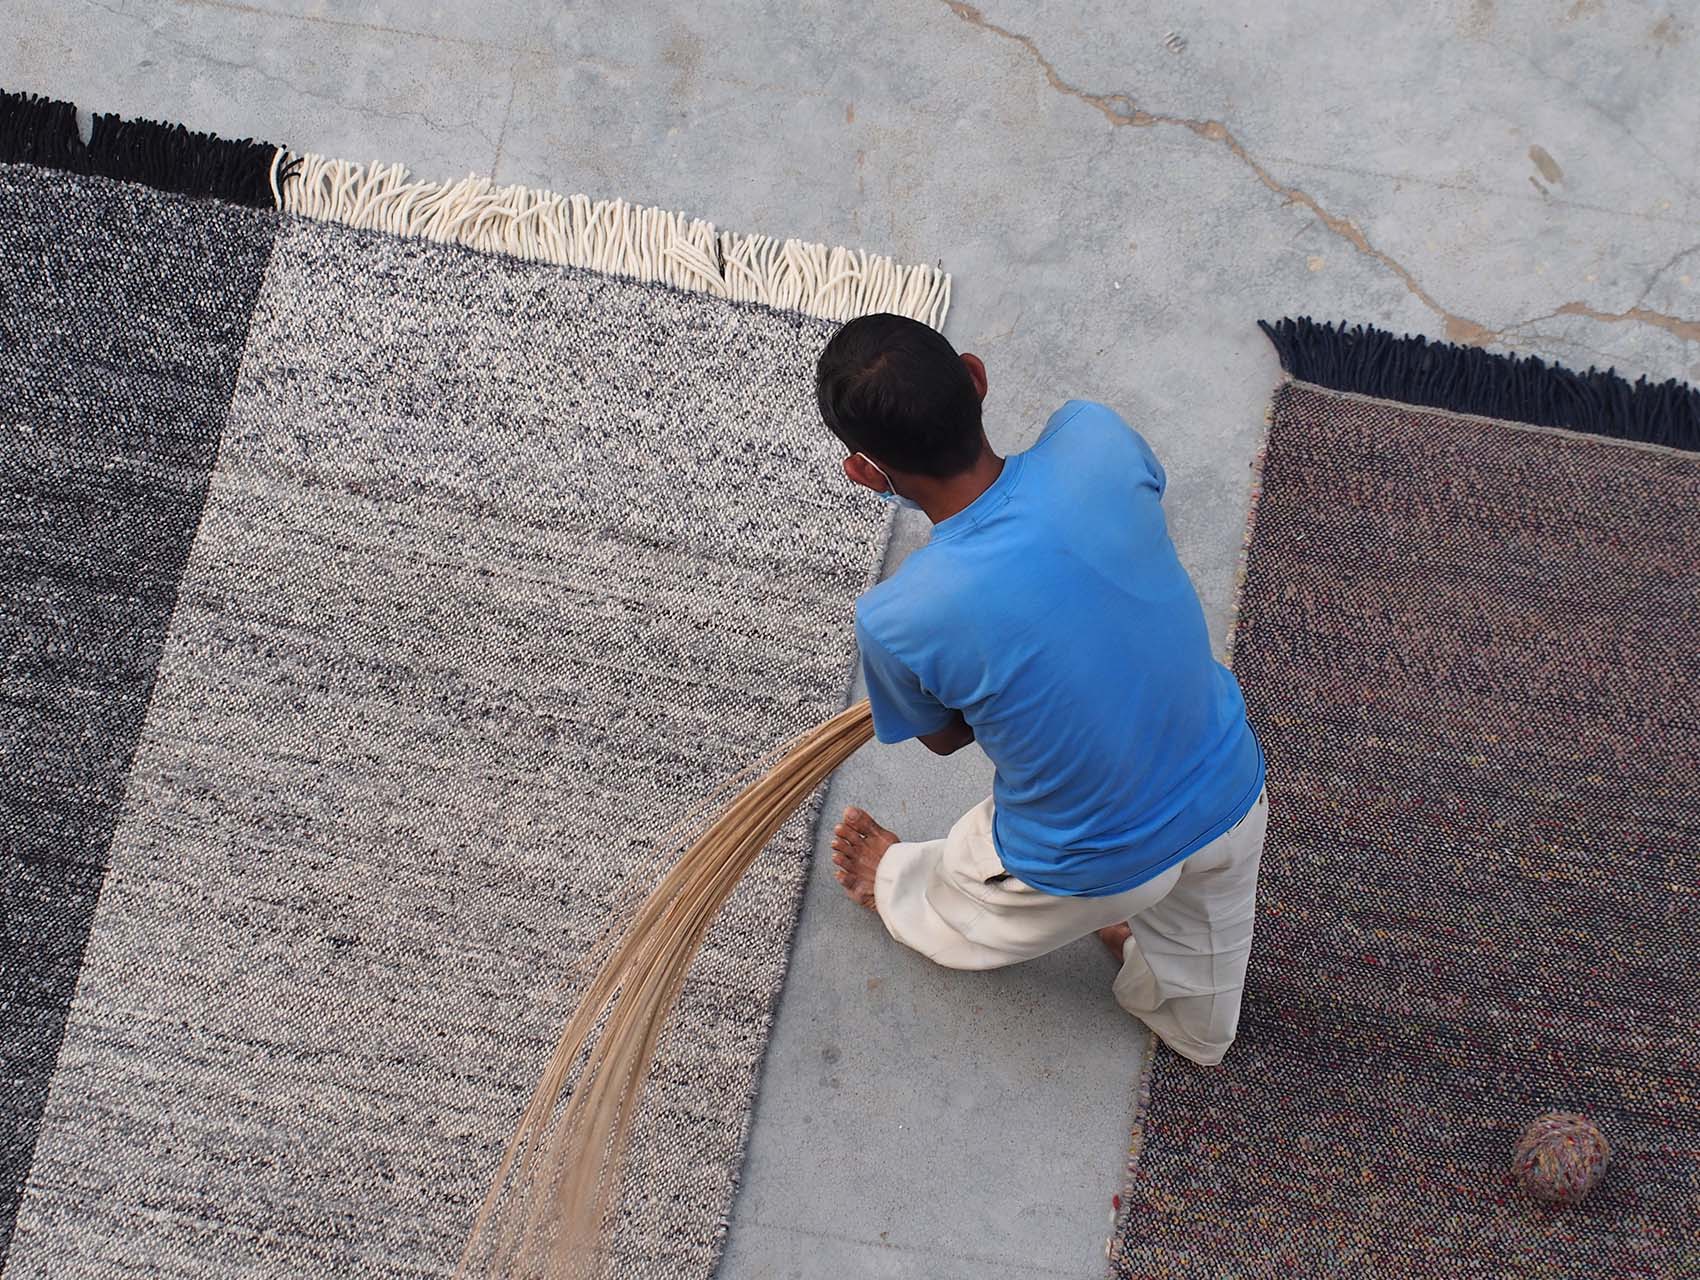 Indian artisan working on the rug Re-Rug designed by Nani Marquina.